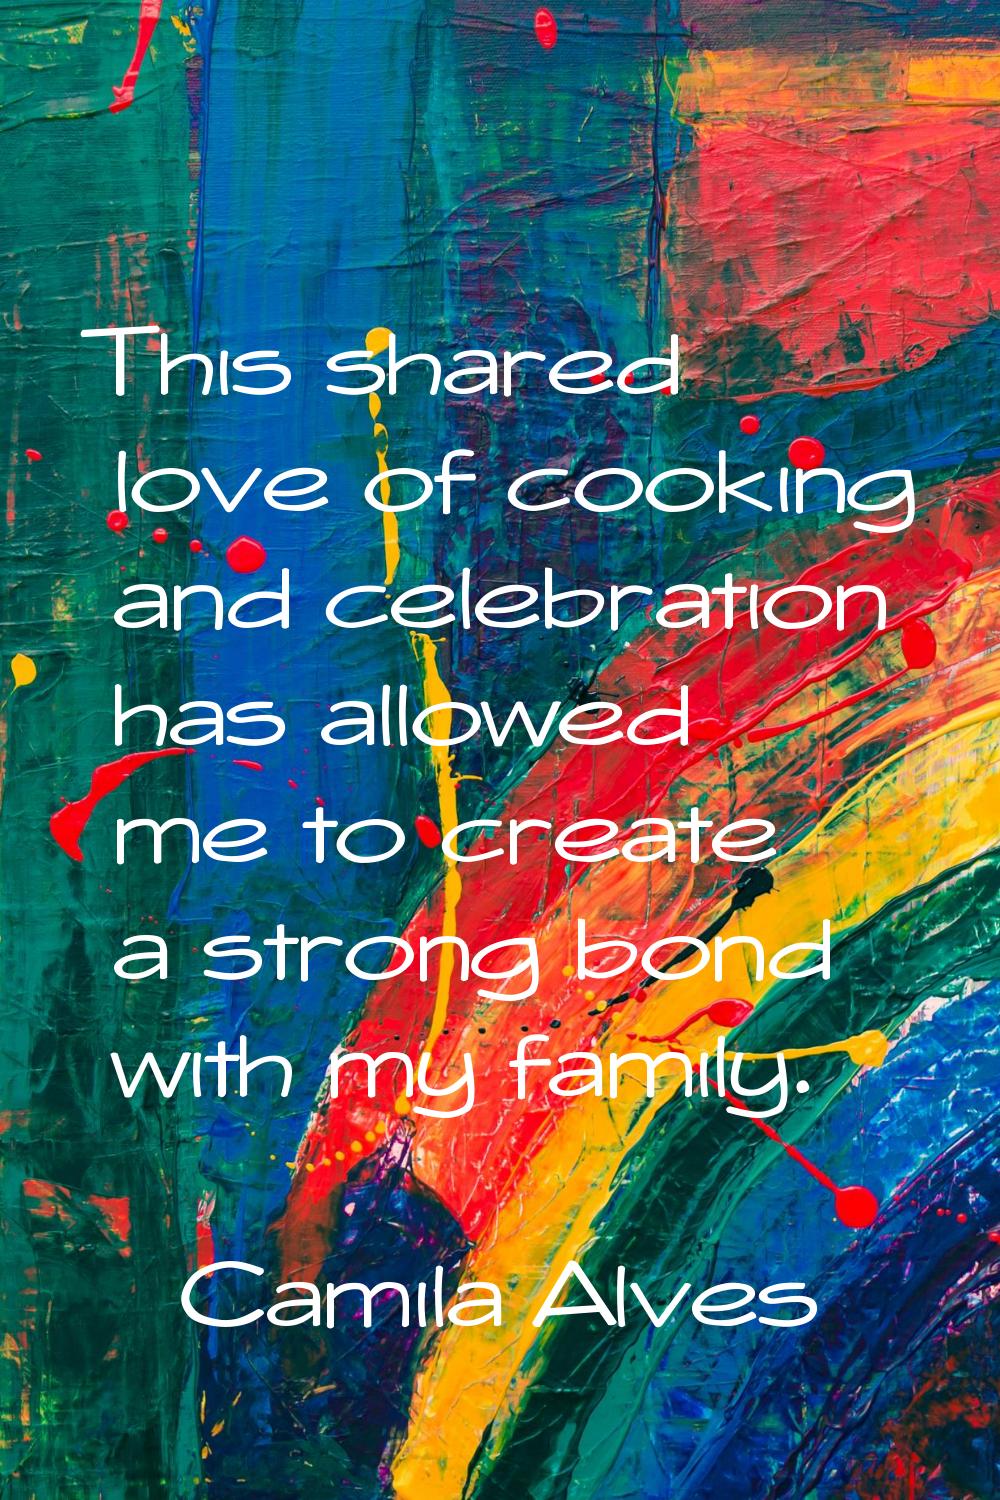 This shared love of cooking and celebration has allowed me to create a strong bond with my family.